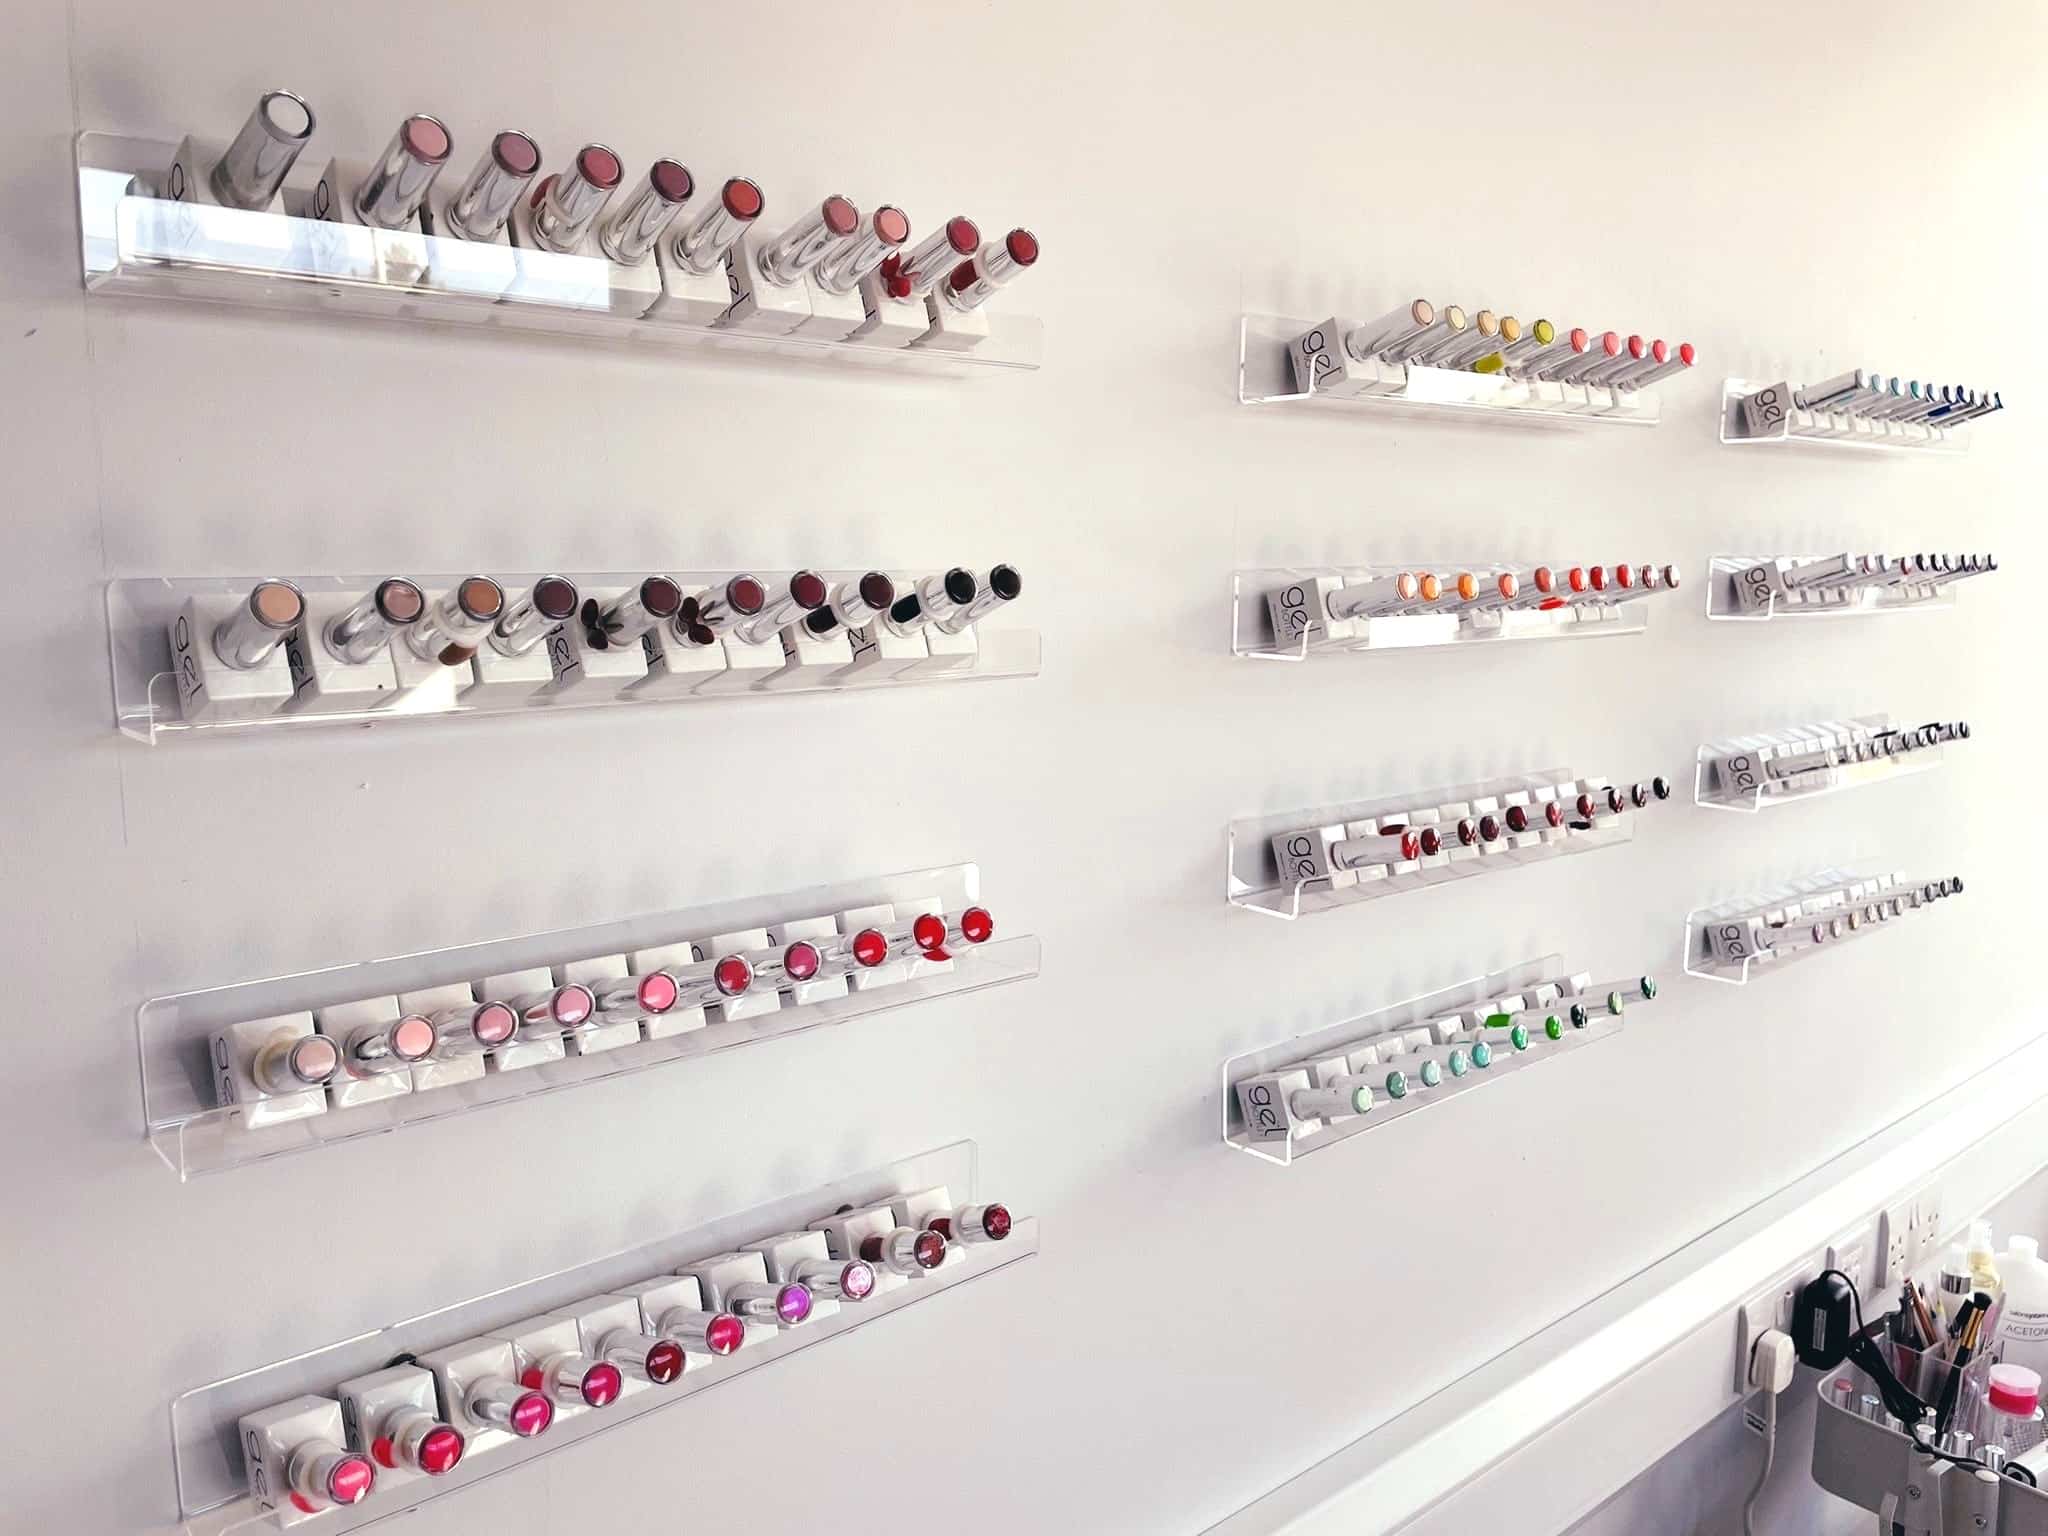 Offices near Enfield - image shows shelves with bottles of nail varnish displayed mounted on a white wall